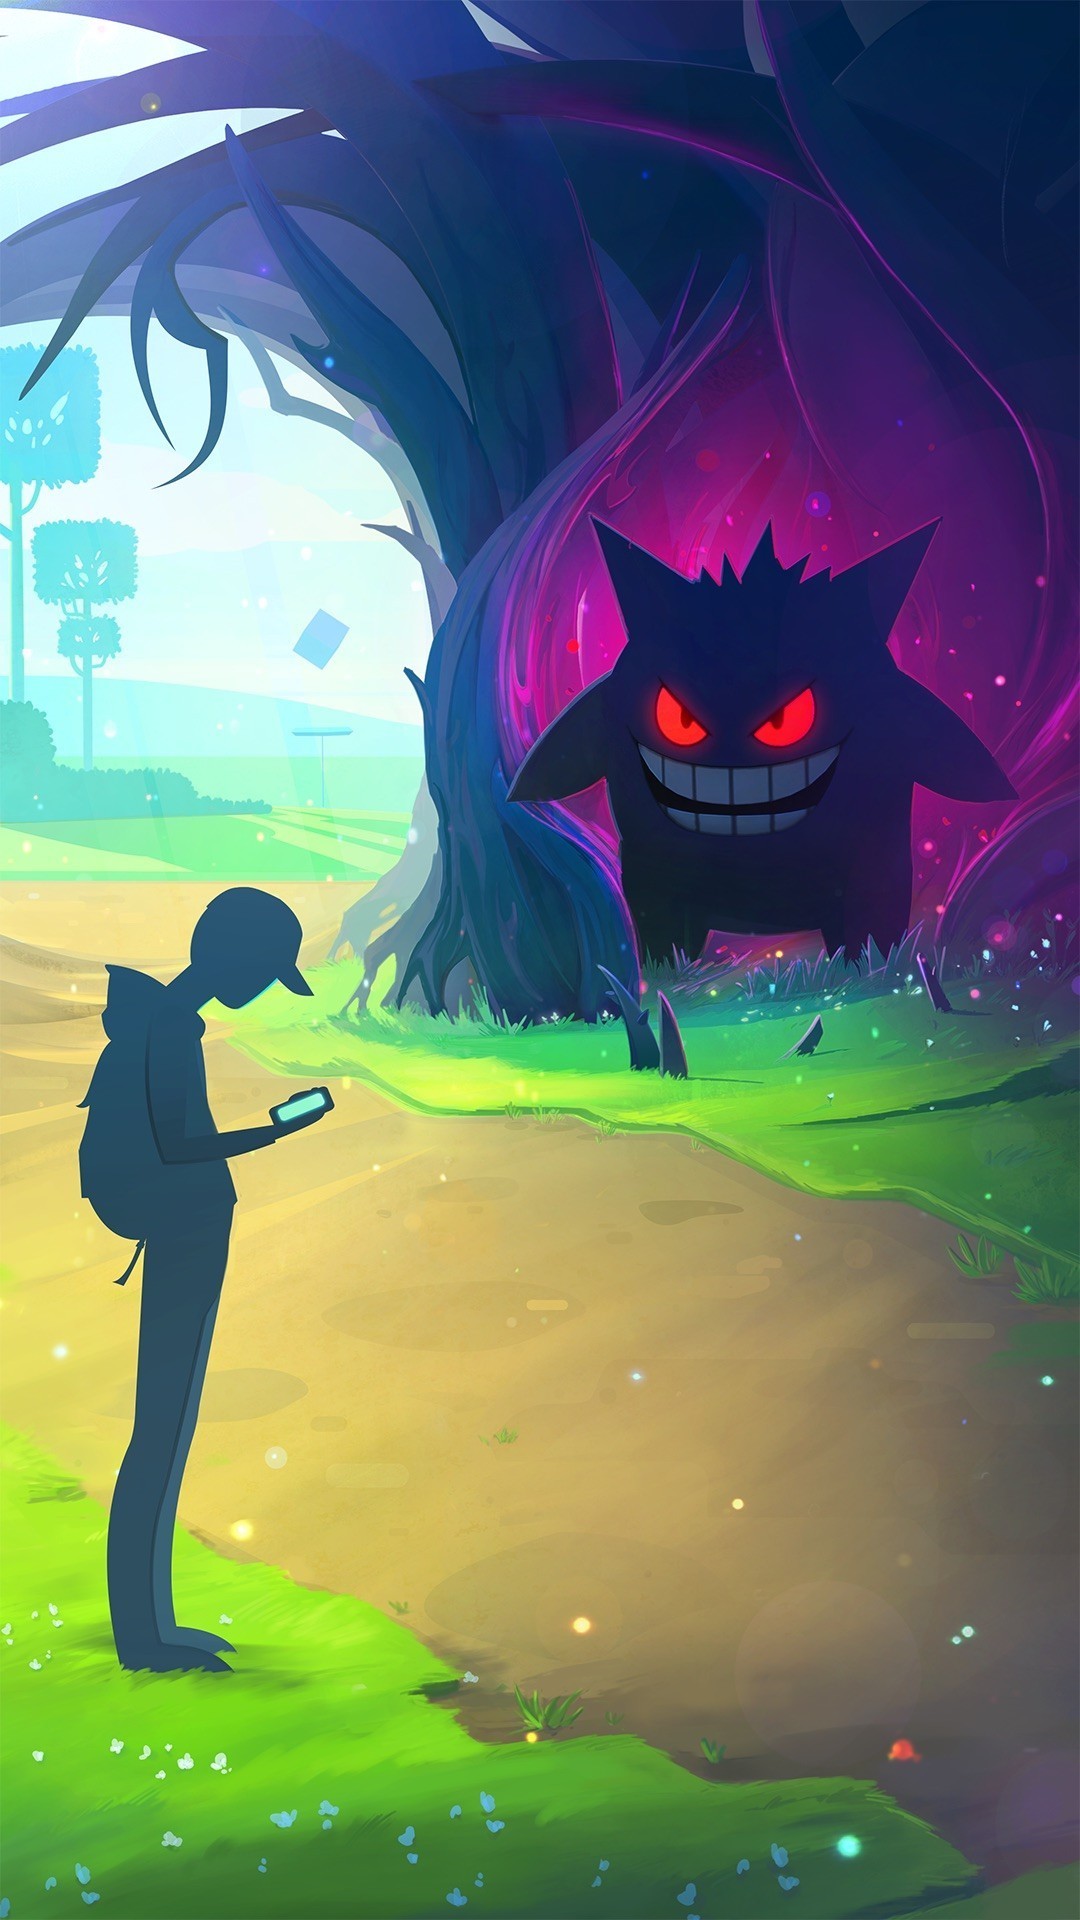 1080x1920 A trainer checks his Nearby radar while Gengar emerges, eyes glowing red,  from the ghostly bowels of an ancient PokÃ©mon tree.